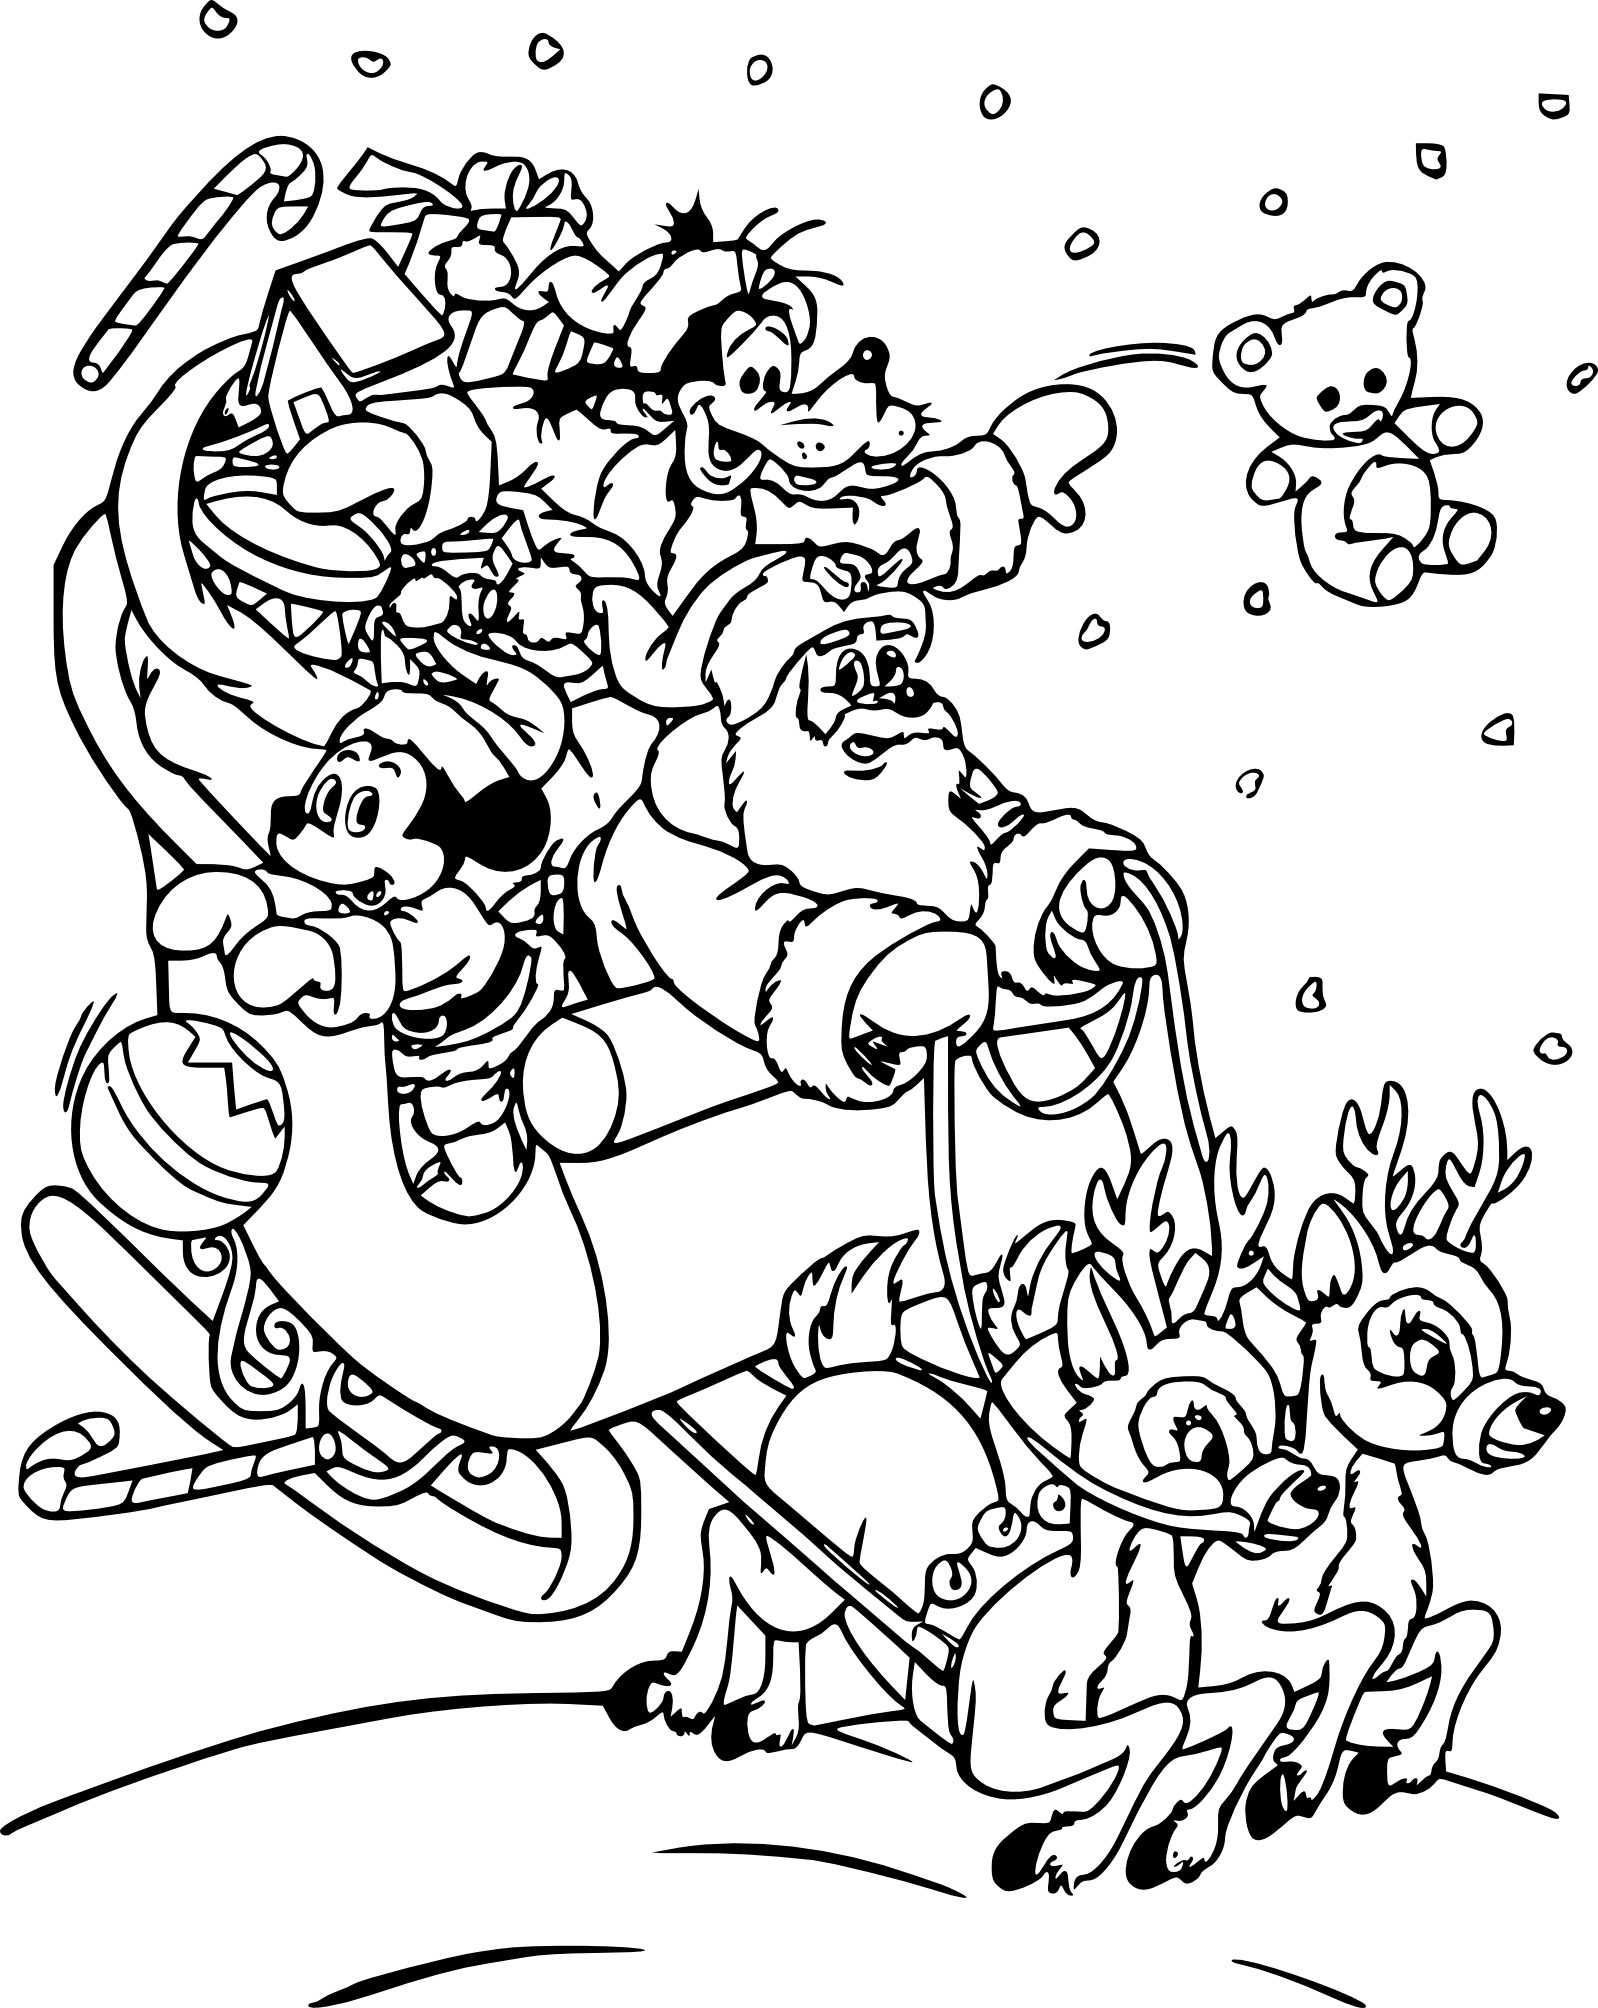 Mickey Goofy Christmas coloring page